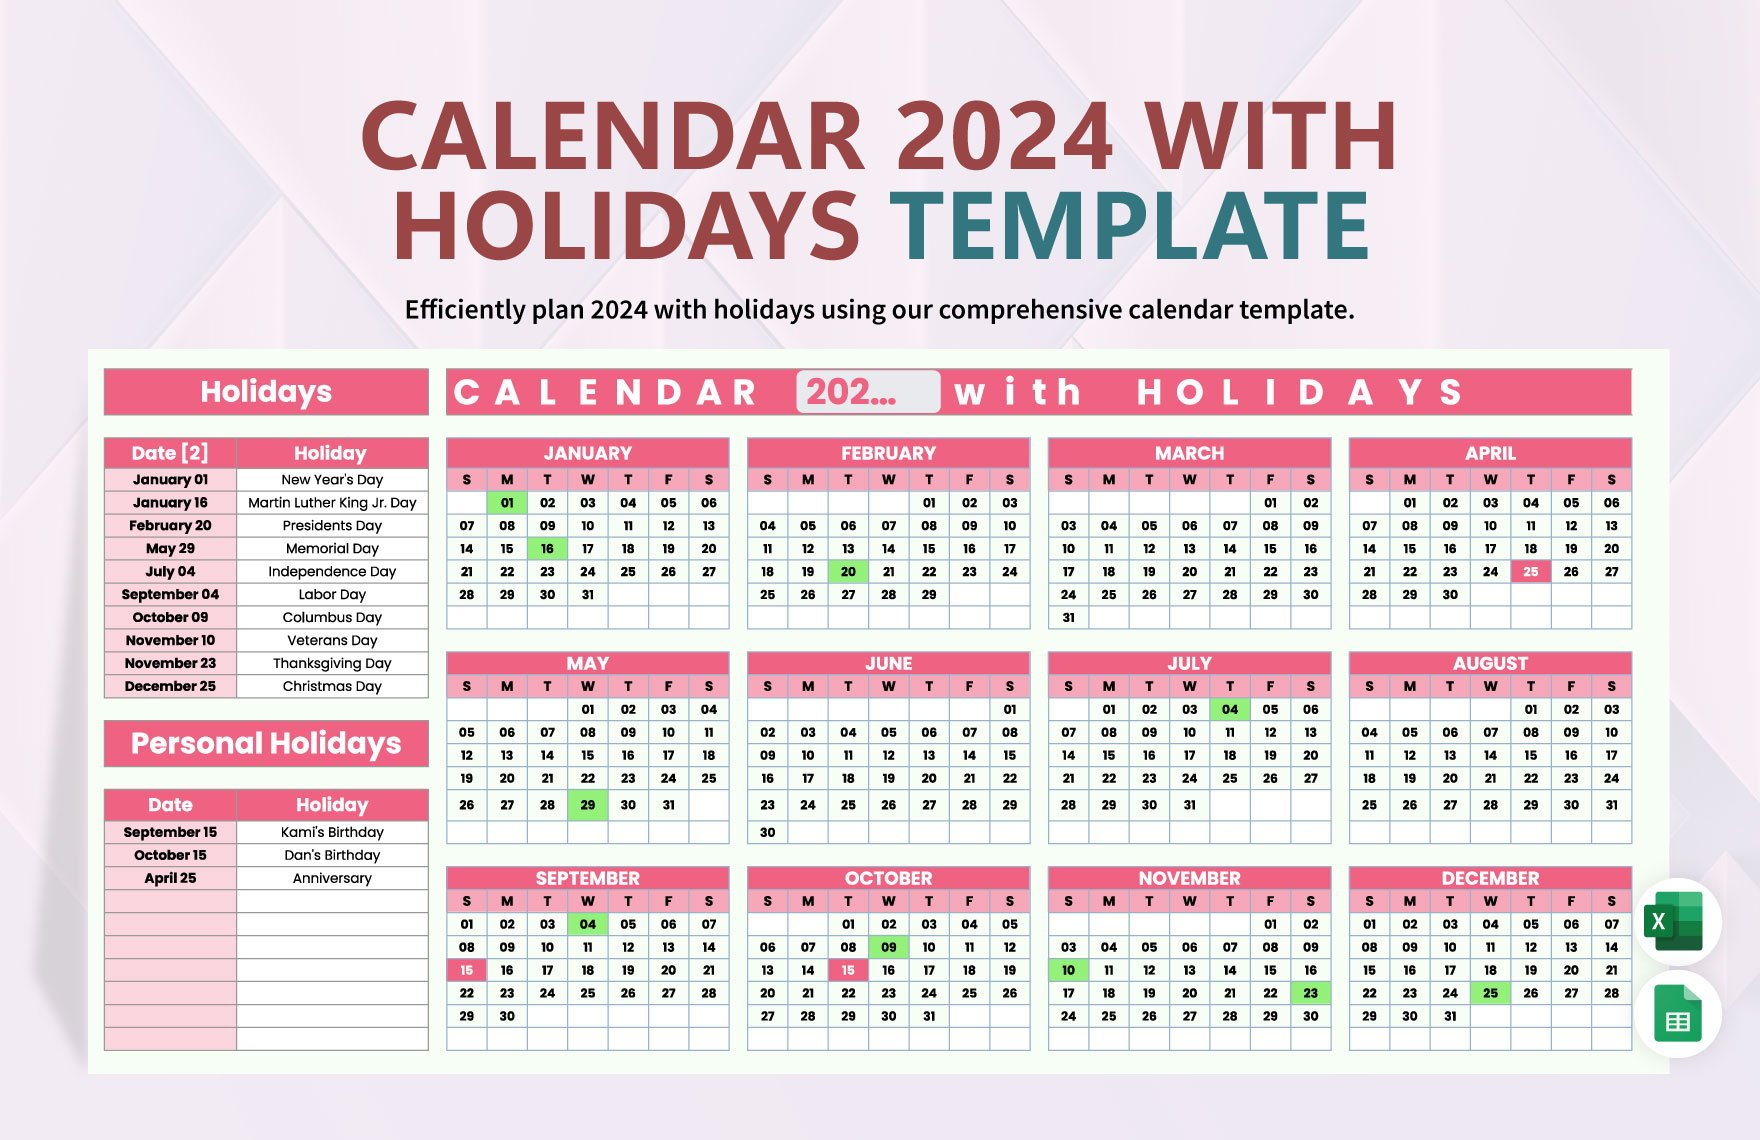 Free Calendar 2024 with Holidays Template